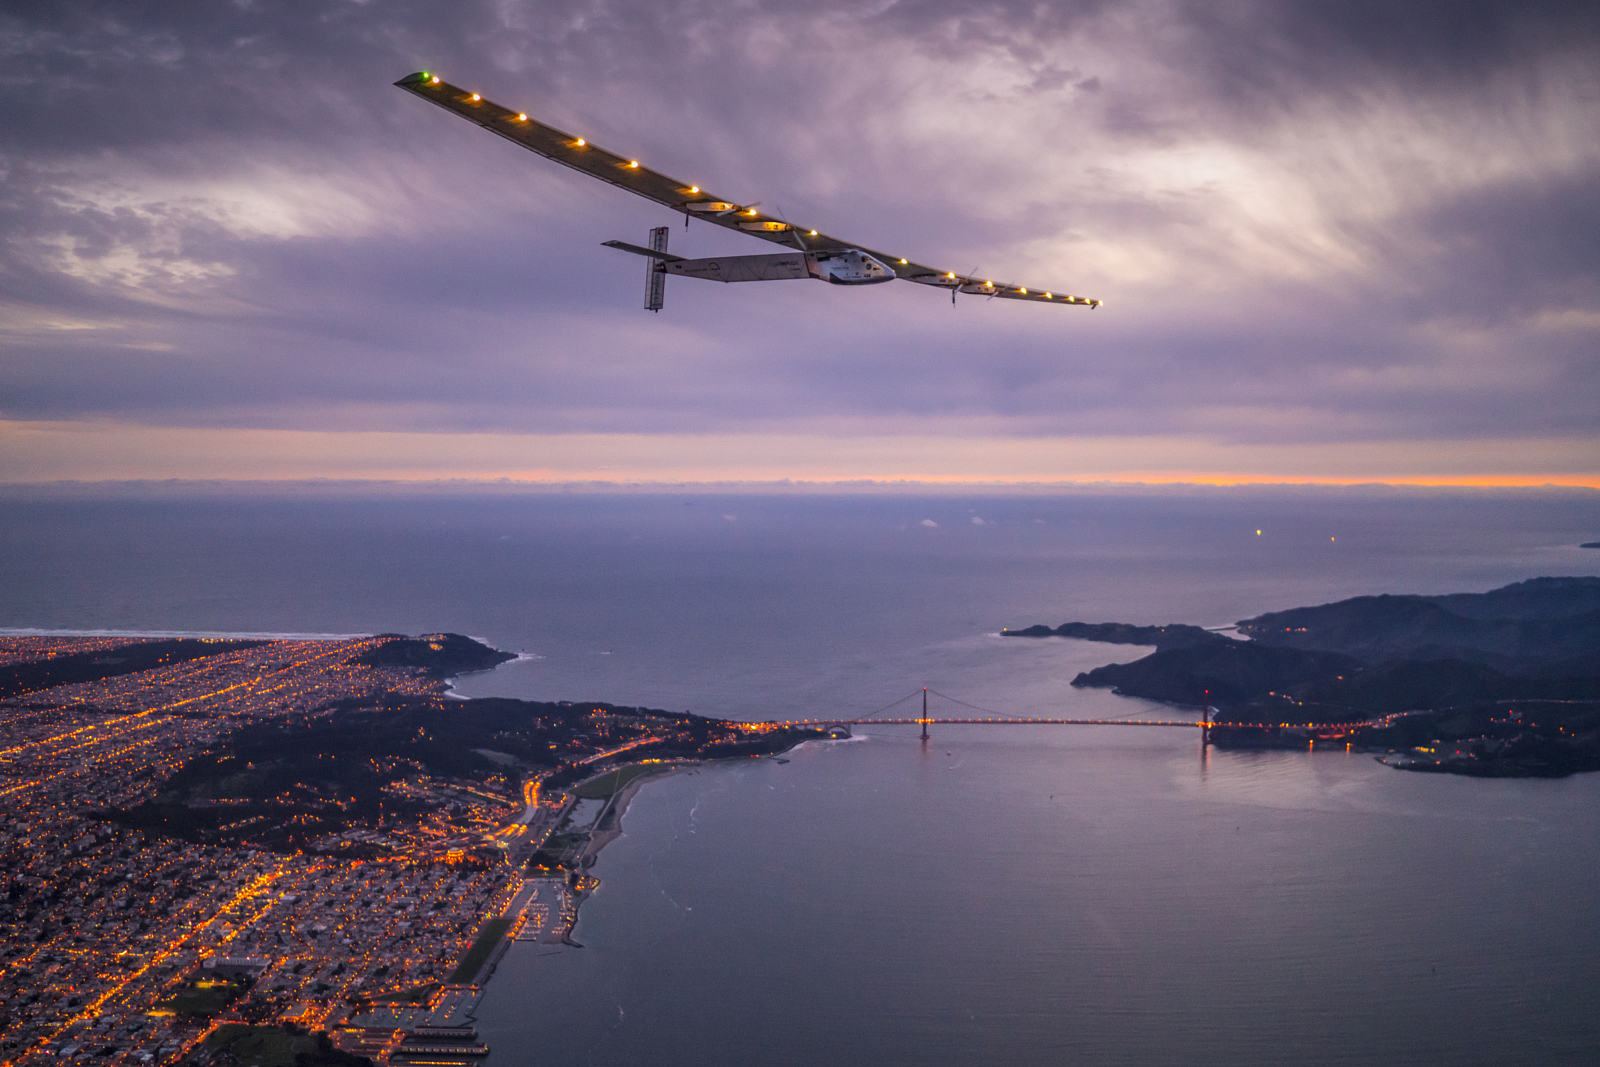 A Day in the Life of Solar Impulse Team, Flying Around the World With Zero Fuel